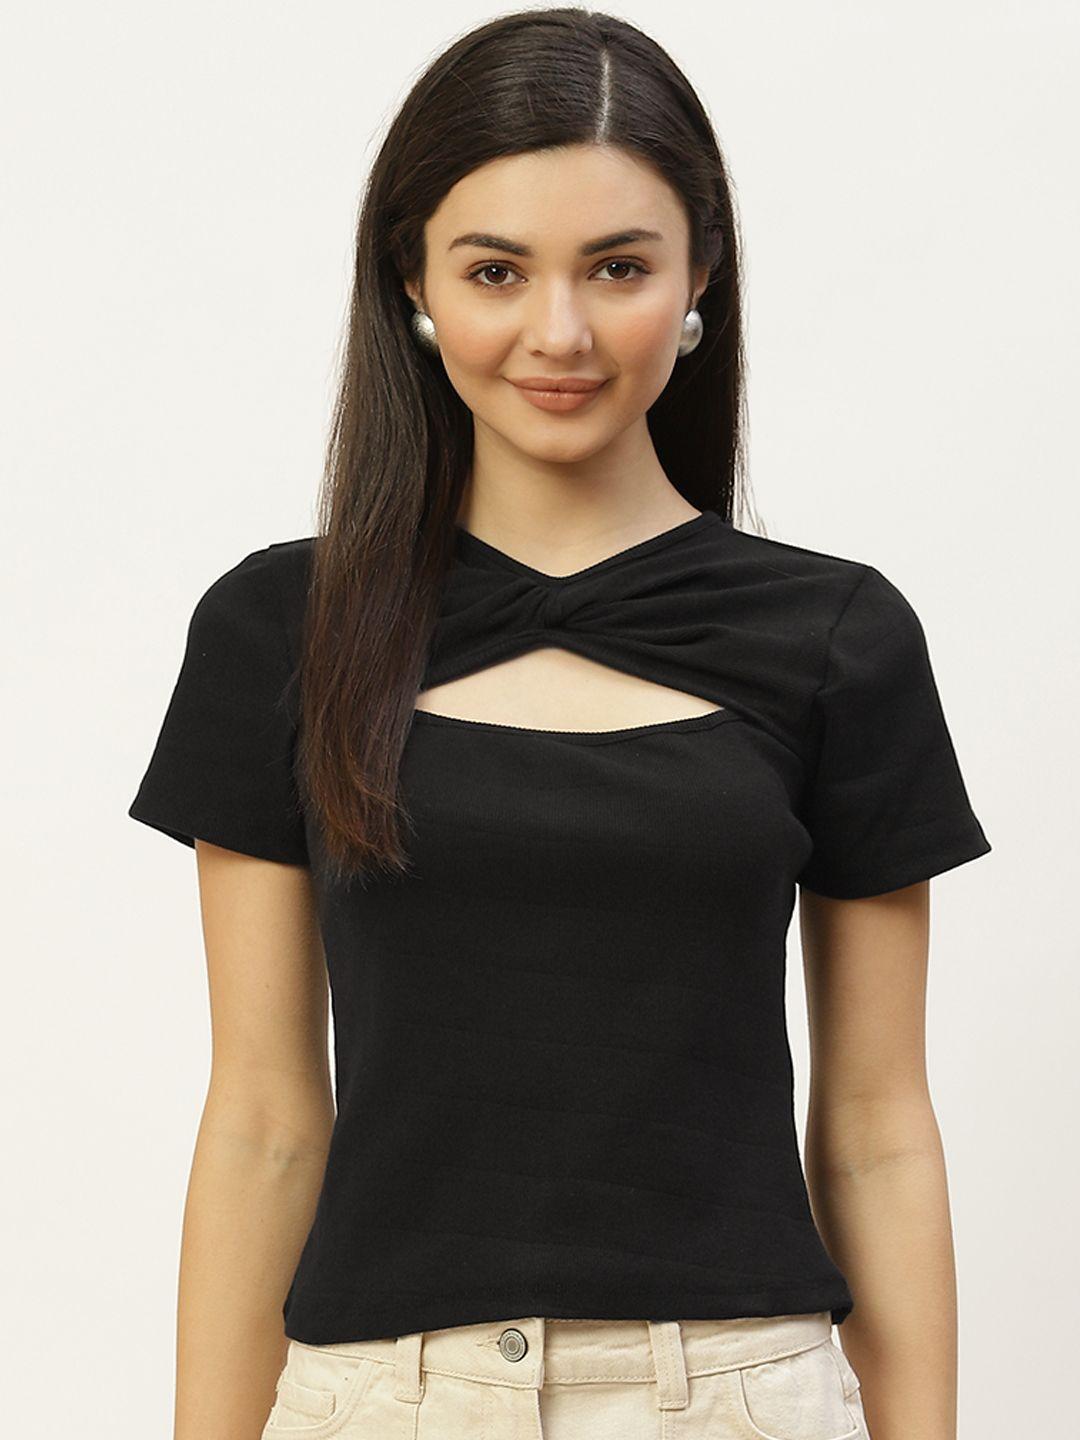 off label black crop top with cut out detail